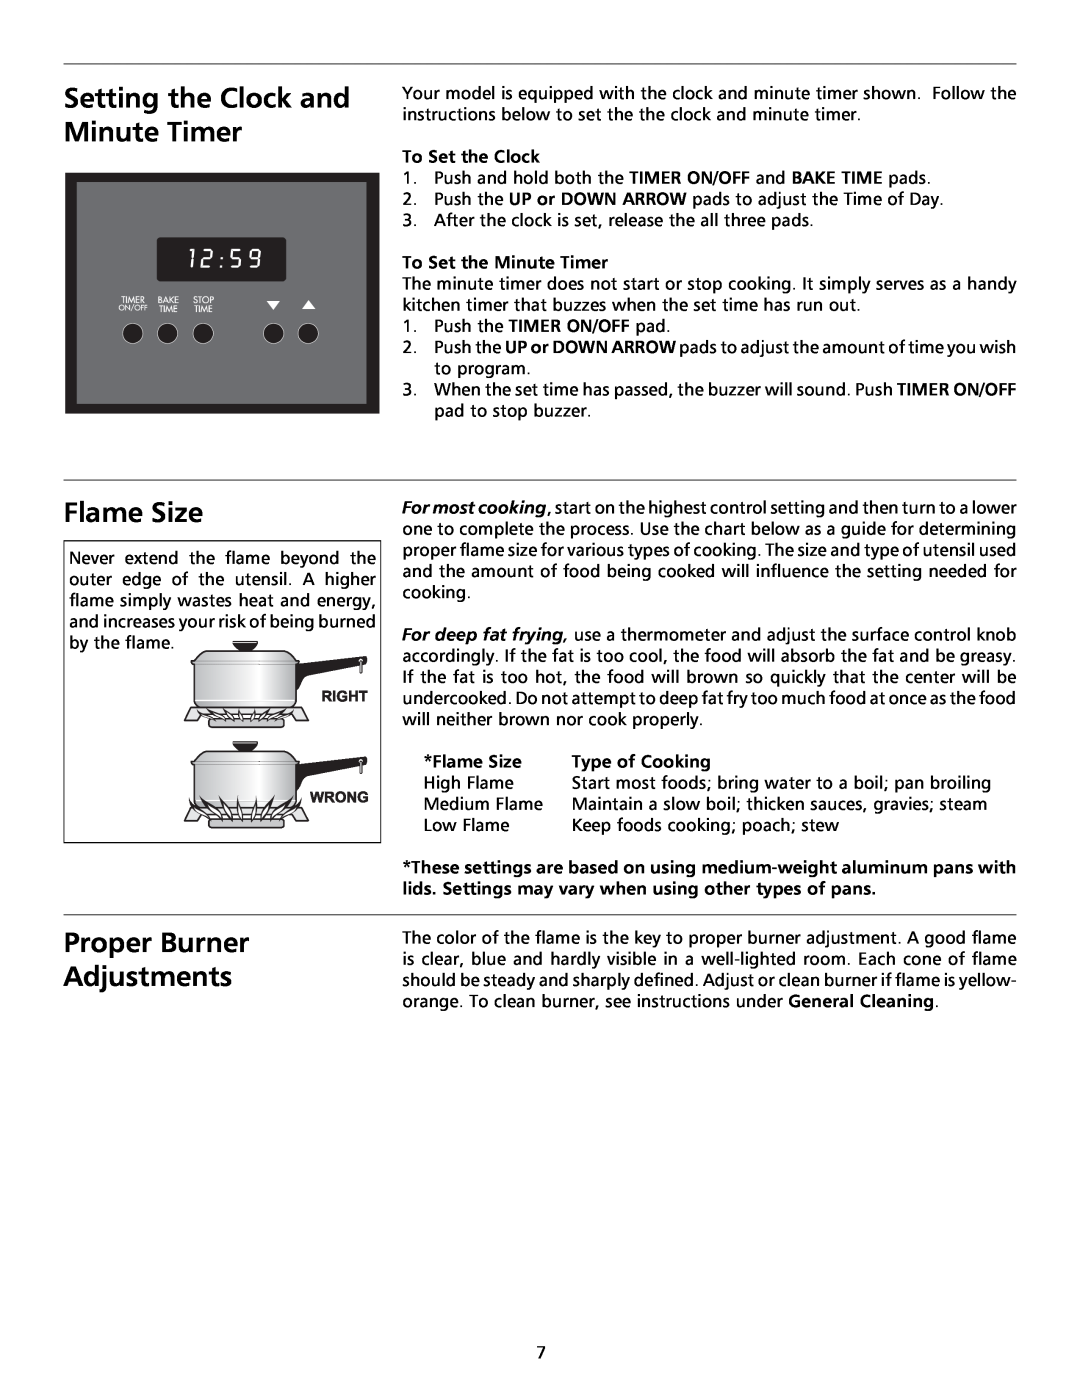 Tappan 316000191 manual Setting the Clock and Minute Timer, Flame Size, Proper Burner Adjustments, To Set the Clock 